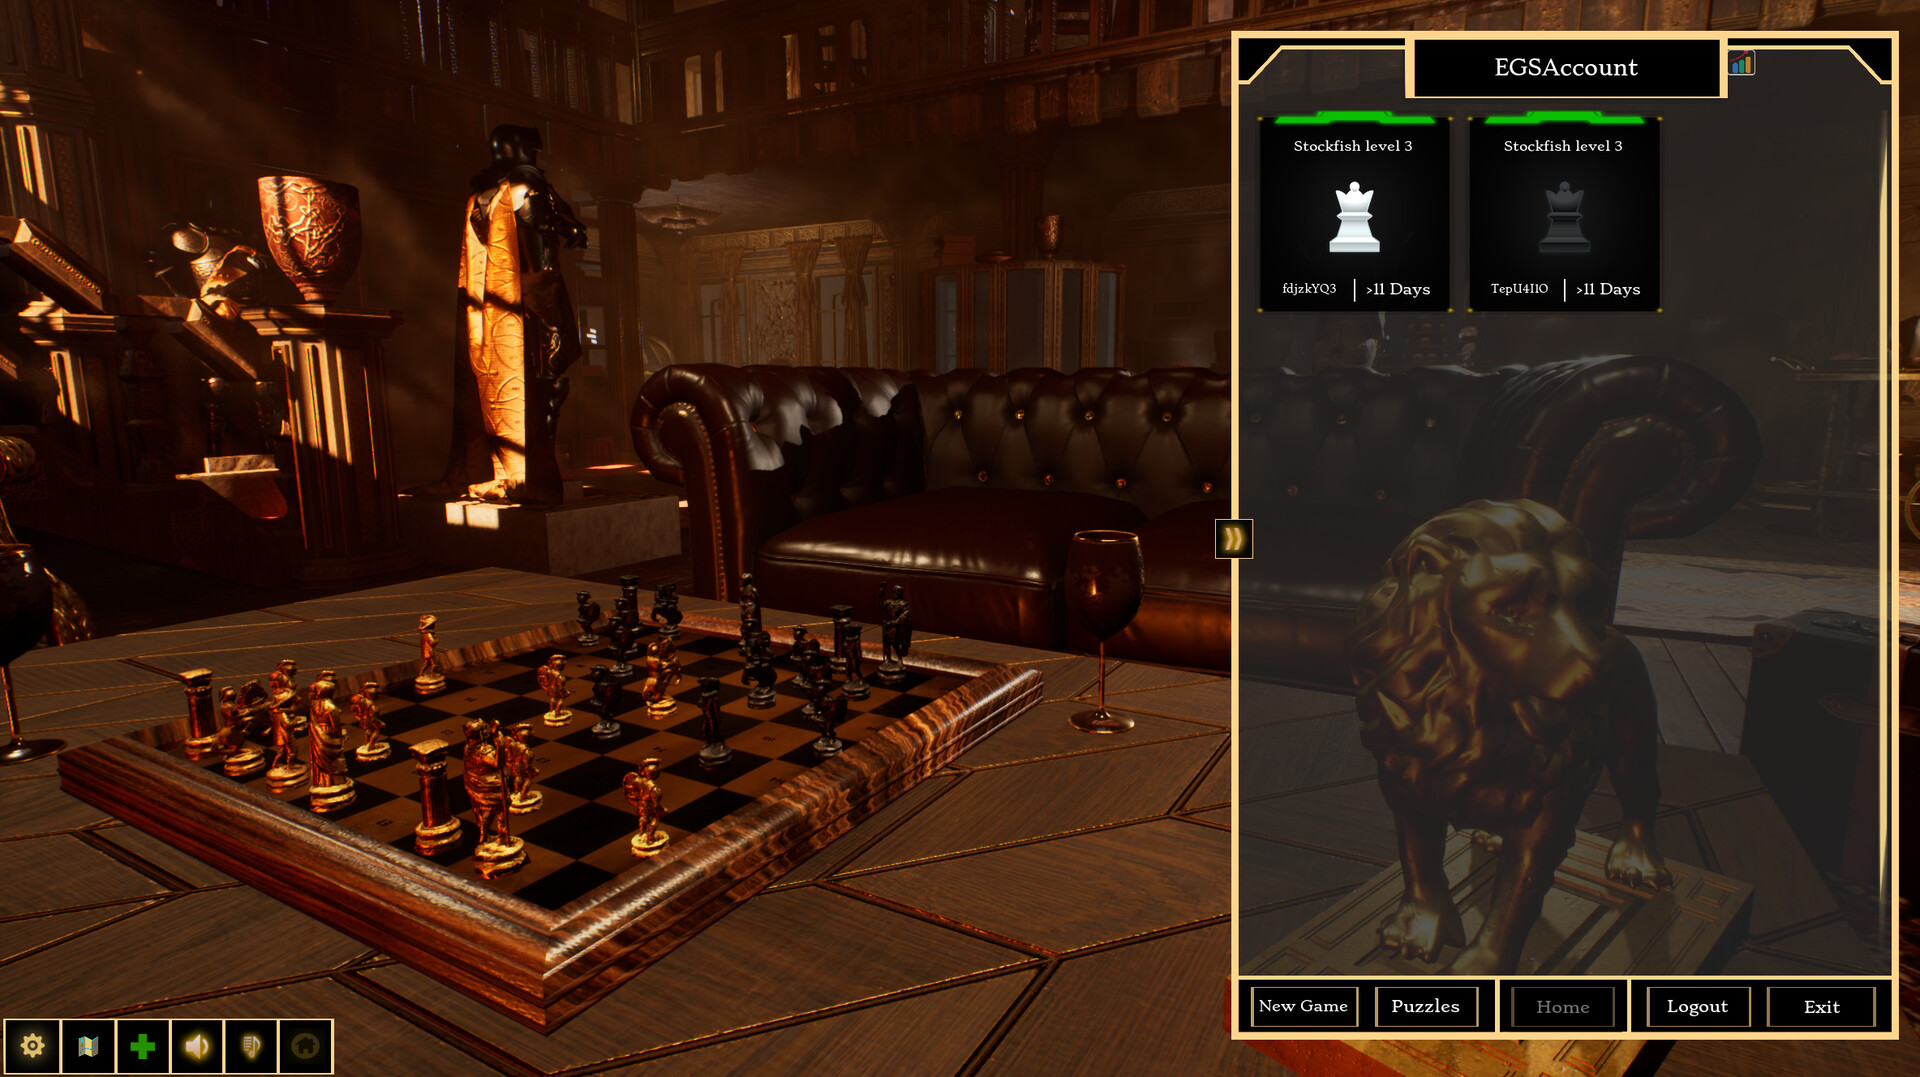 Cooperative Chess on Steam